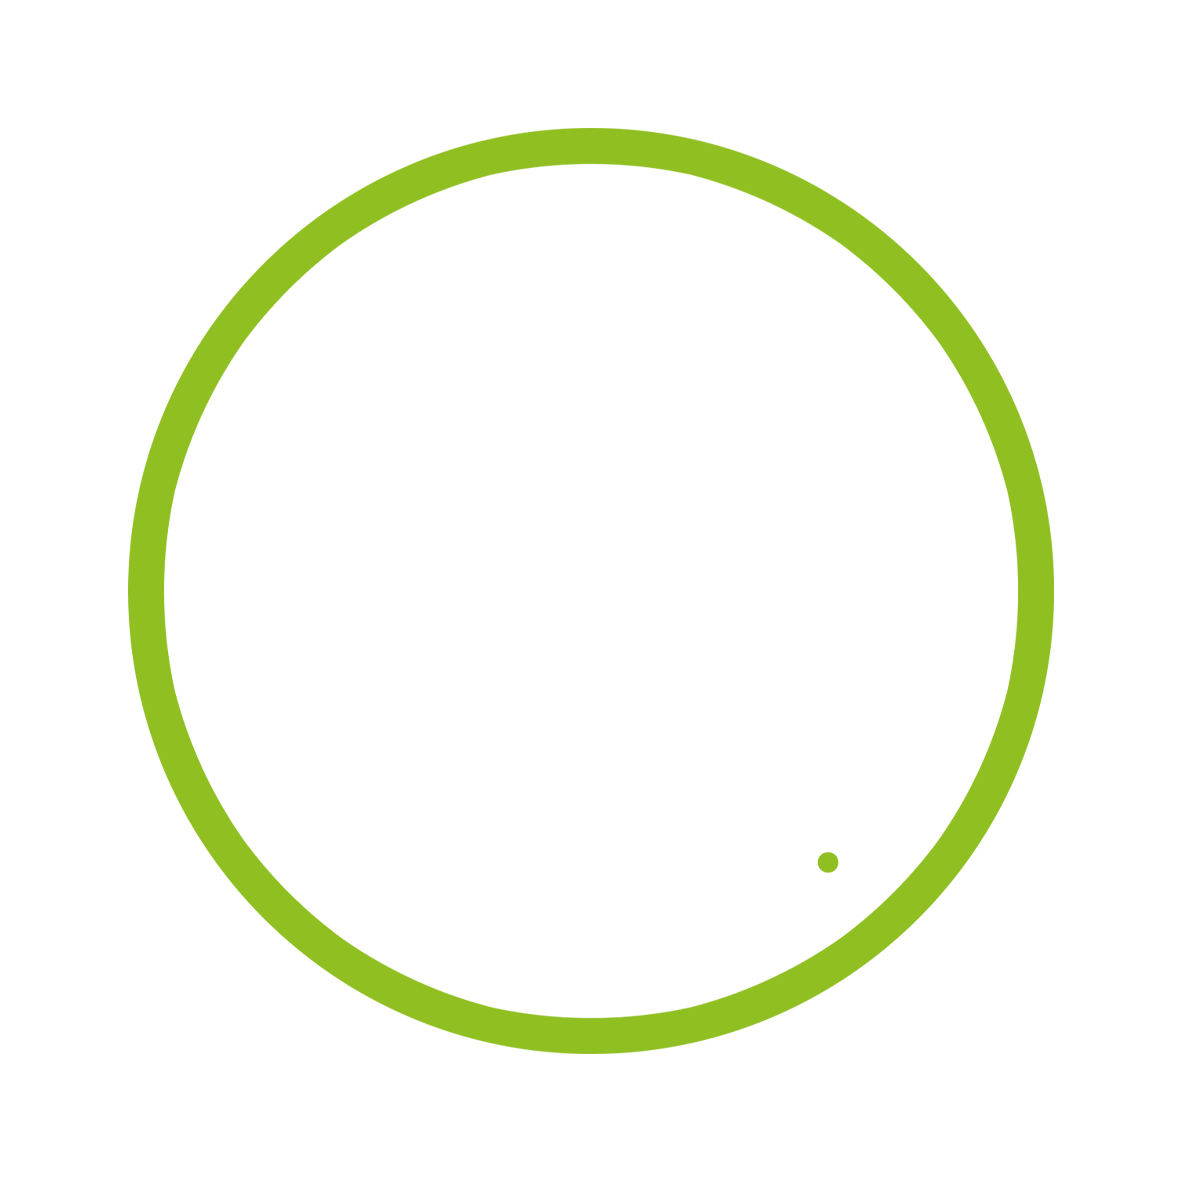 90 MINUTES podcast